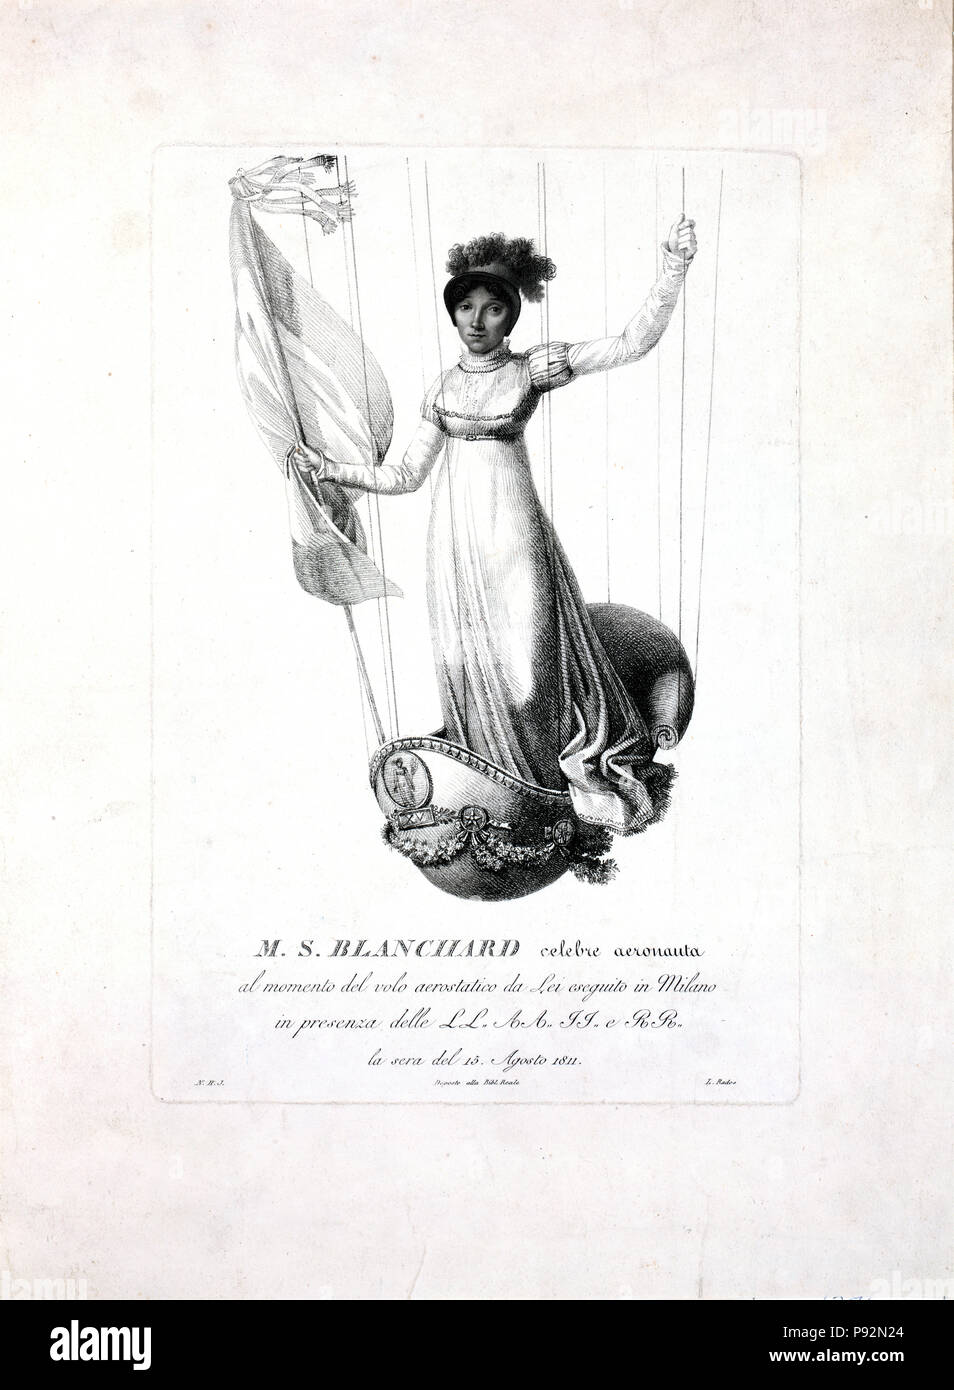 portrait of French balloonist Marie-Madeleine-Sophie Armand Blanchard, standing in the decorated basket of her balloon during her flight in Milan, Italy, in 1811 Stock Photo